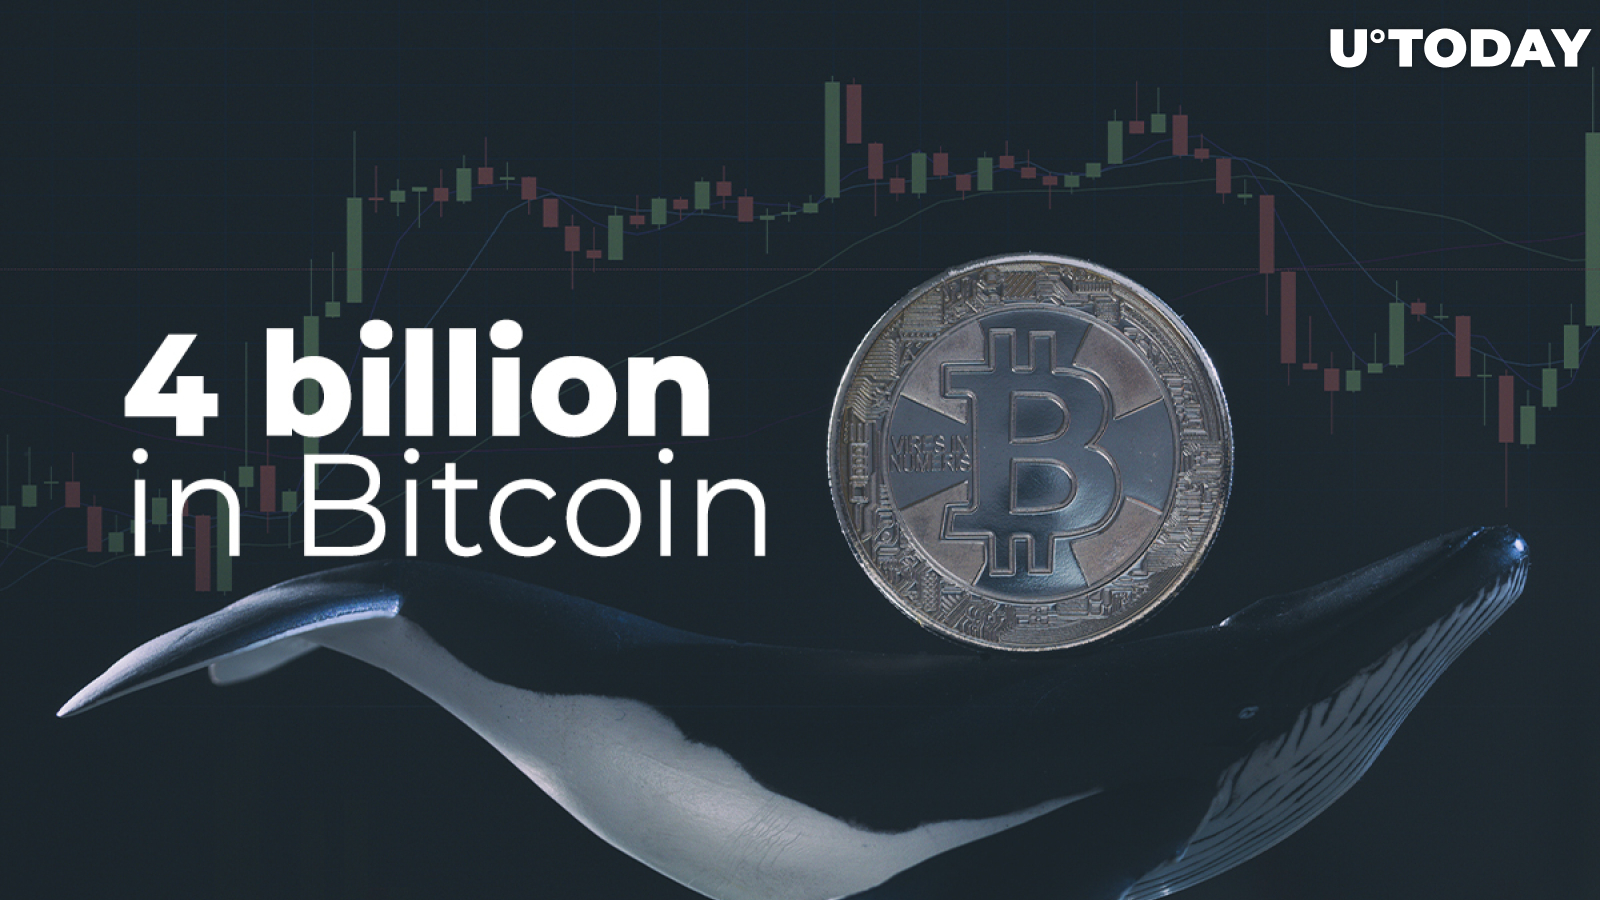 Whales Shift More $4 Billion in Bitcoin, While BTC Declines to $48,500